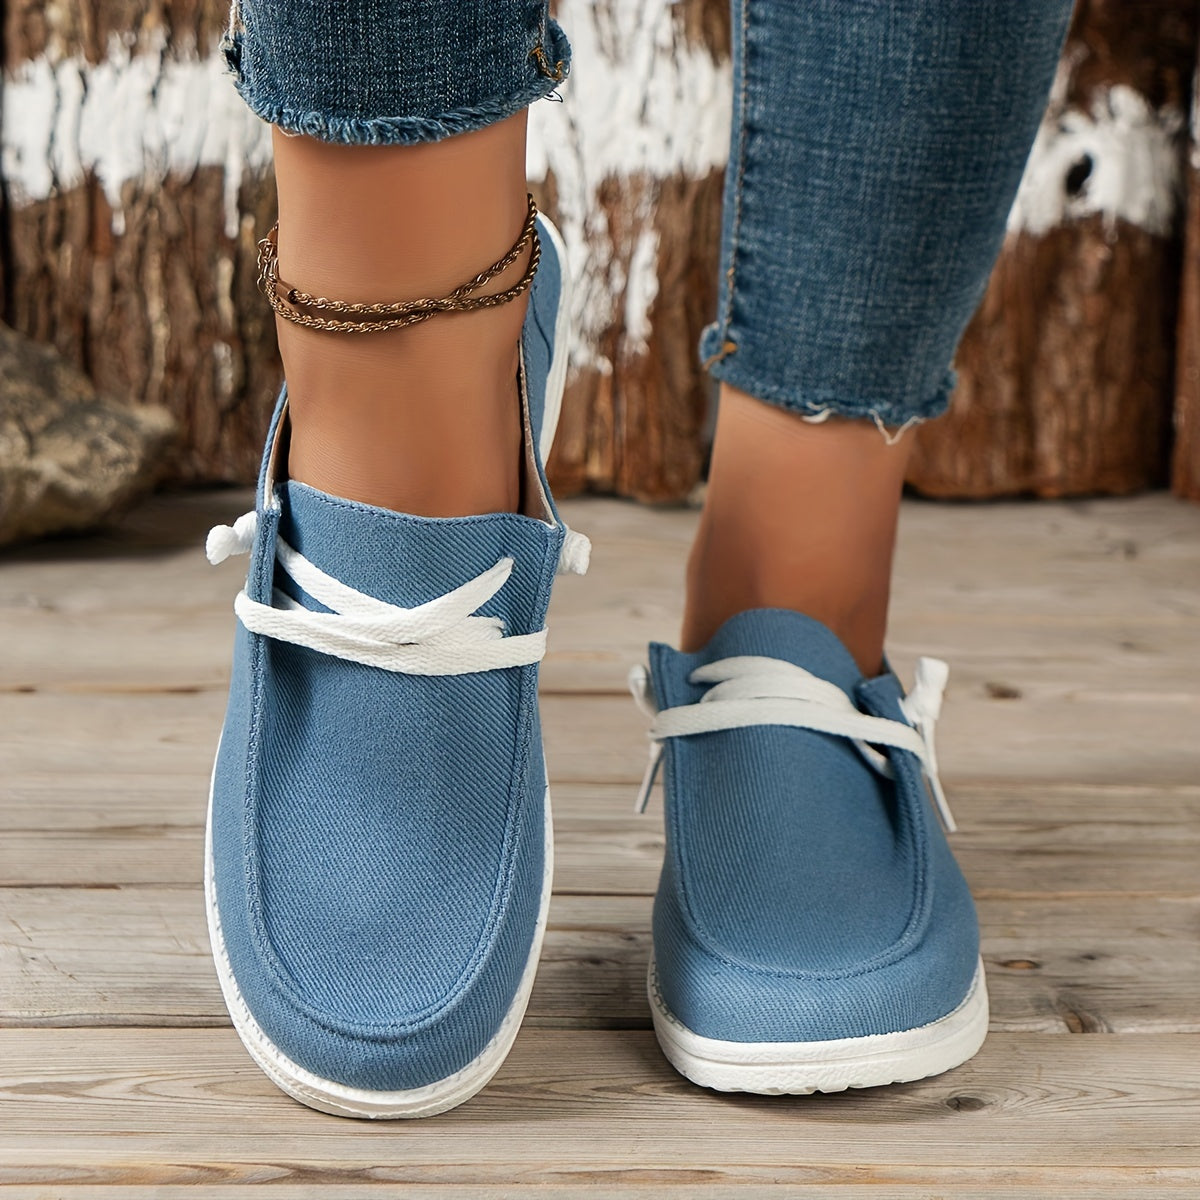 Low Top Canvas Shoes, Slip On Flat Loafers